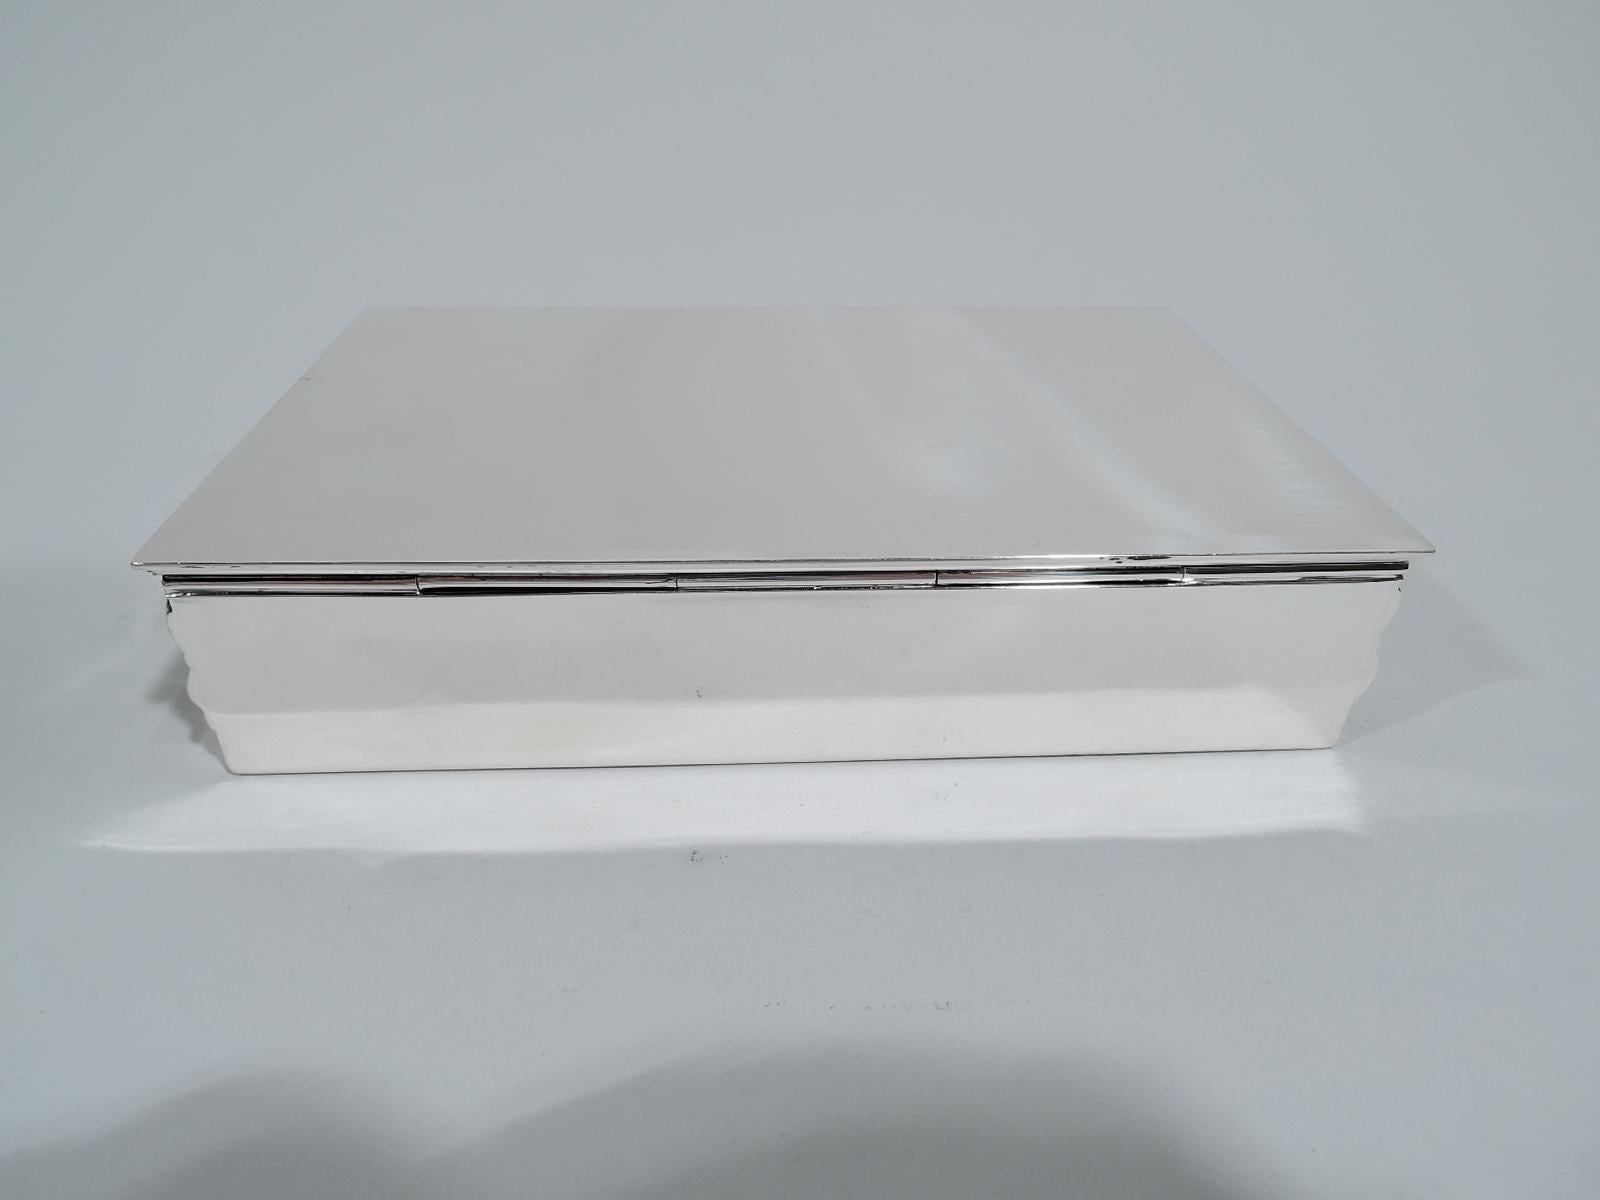 Mid-Century Modern sterling silver box. Made by Tiffany & Co. in New York. Rectangular with flat and hinged cover. Sides and front have chased band of stylized and imbricated chevrons. A stylish revival of a historic 19th century pattern that is